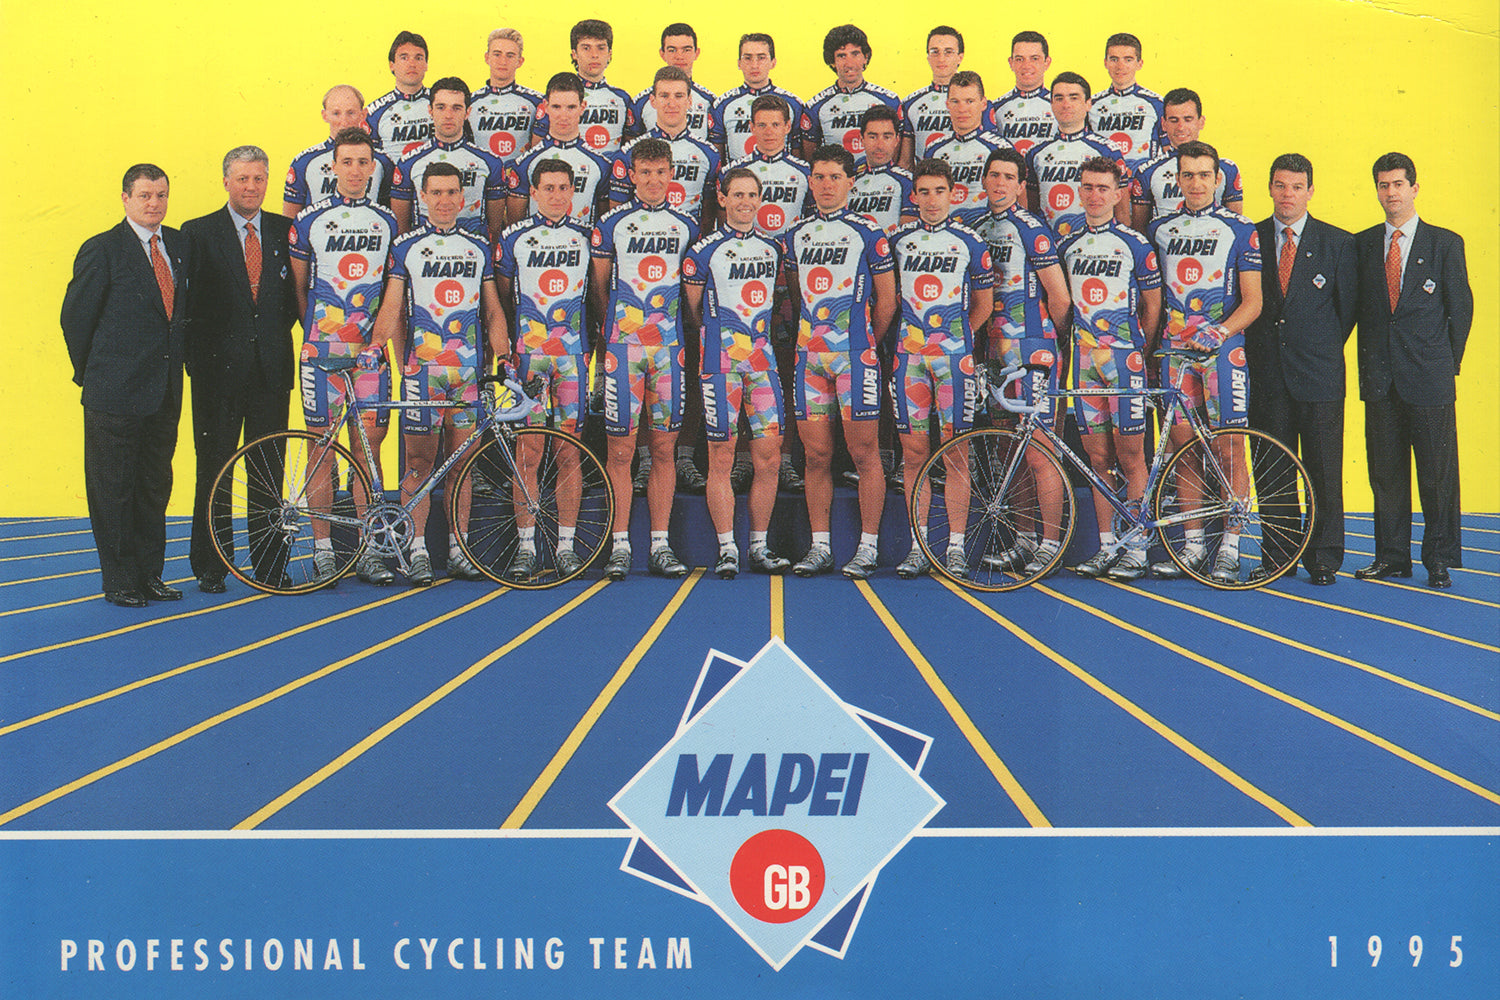 The MAPEI-GB cycling team postcard from the 1995 season with sponsors Mapei, GB, Latexco, Shimano, Colnago, Sportful, Briko and Enervit.